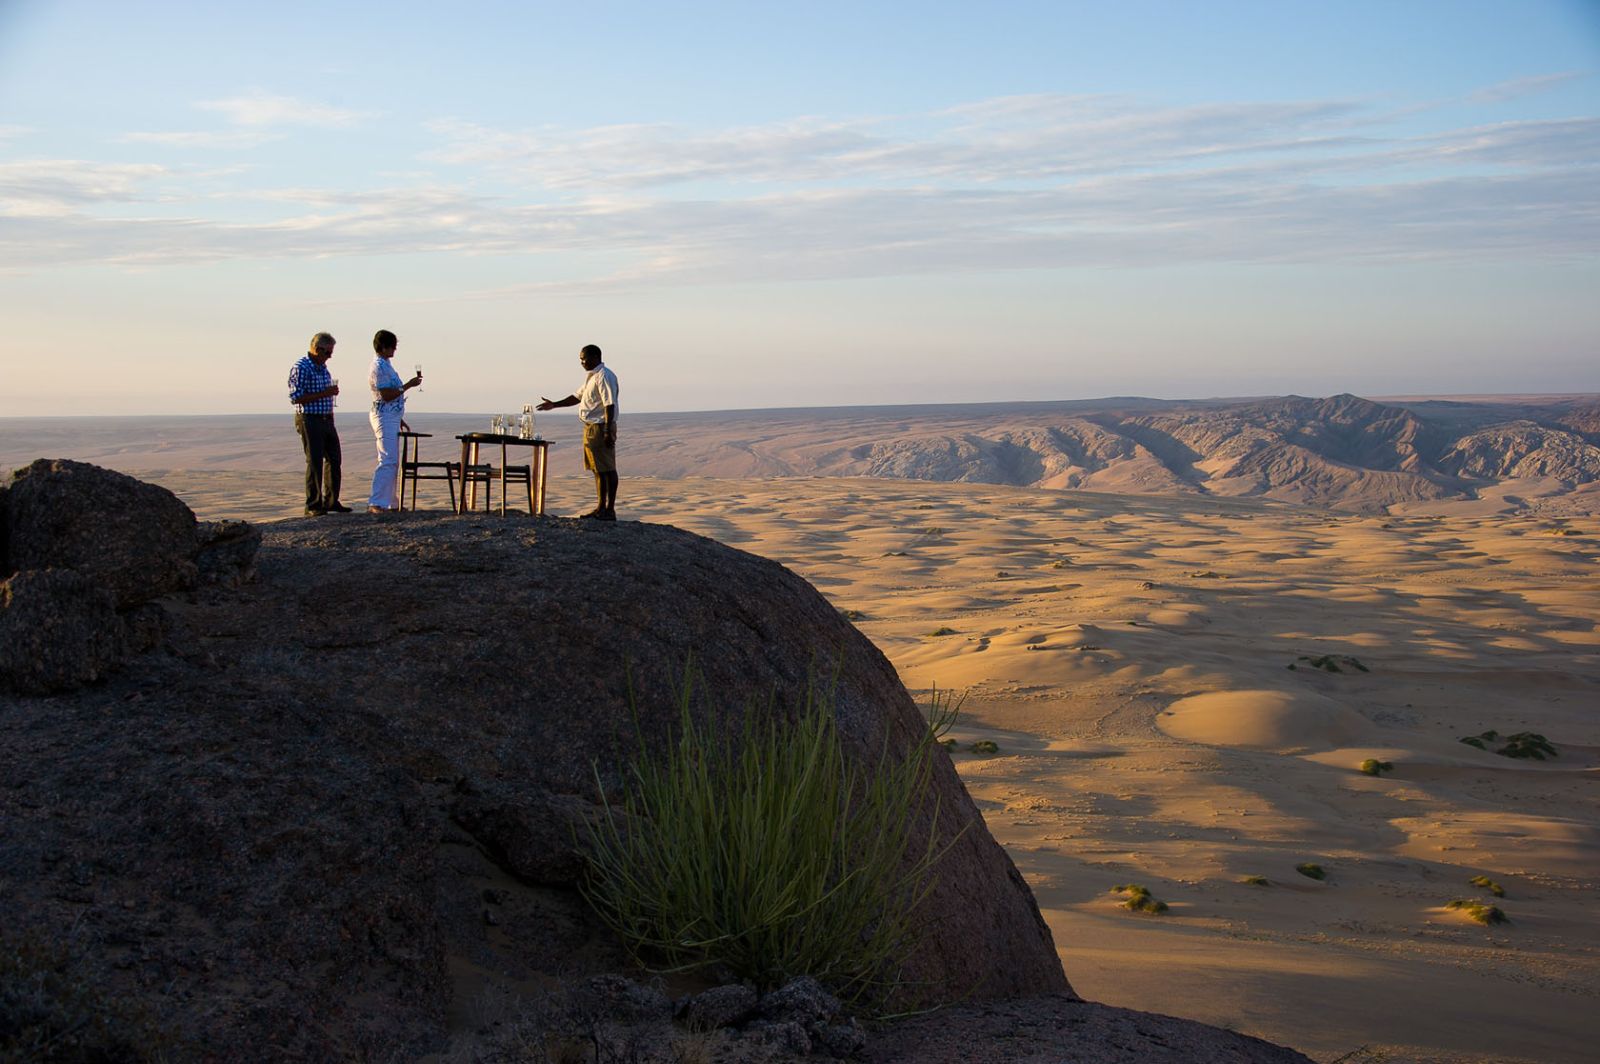 Sundowners overlooking the desert during a stay at luxury lodge Serra Cafema in Kakaoland, Namibia